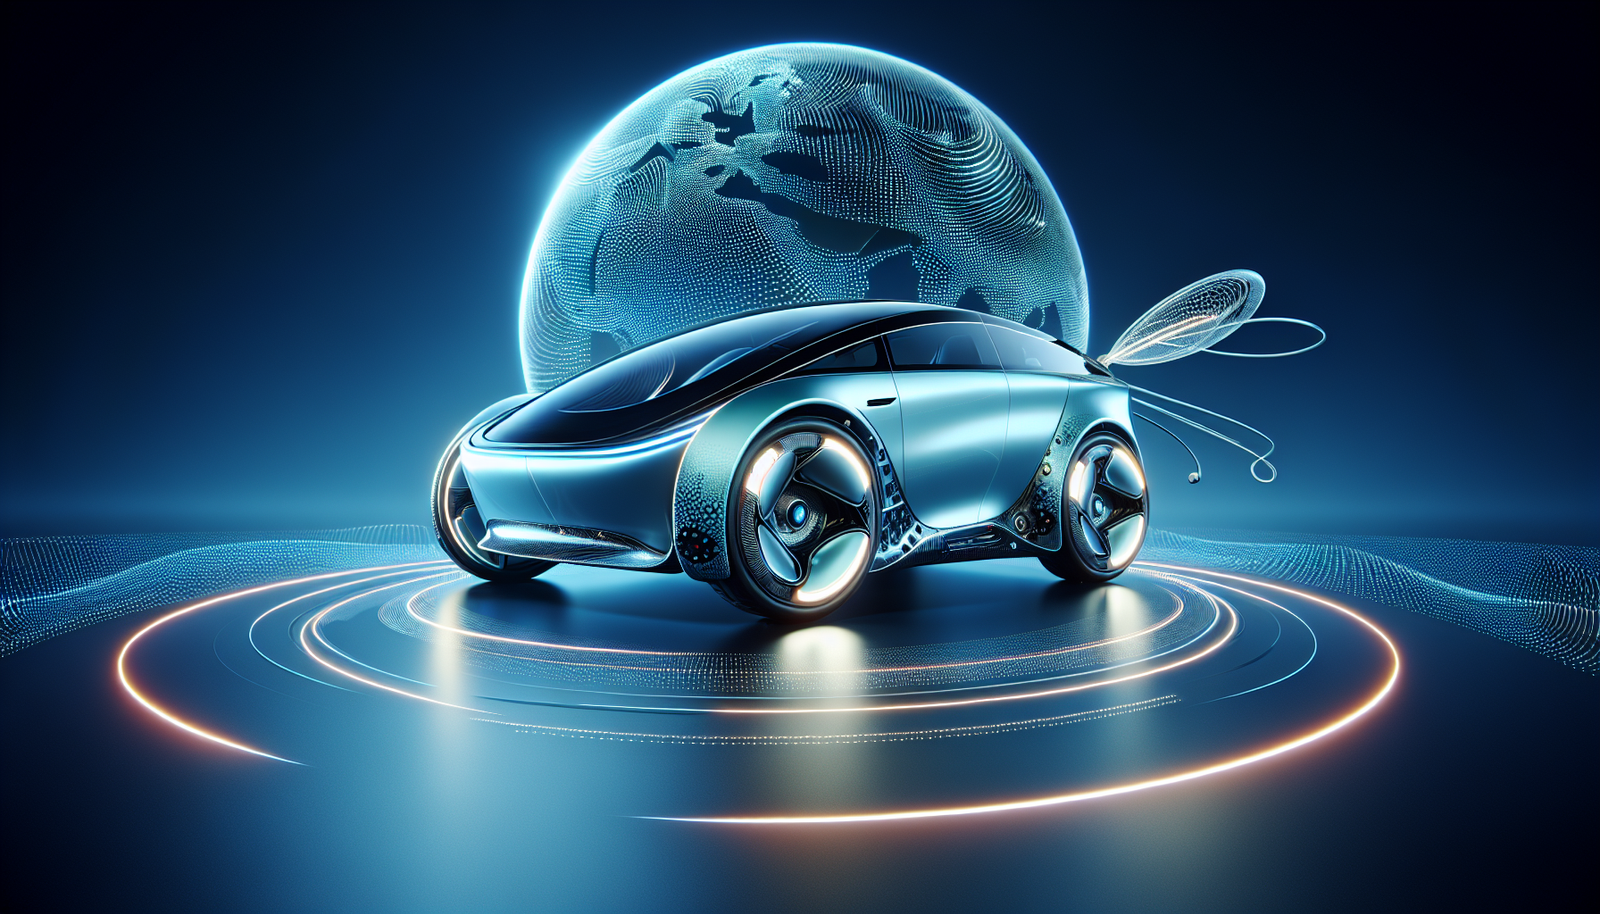 What Are The Current Trends In Electric Vehicle Design And Aesthetics?